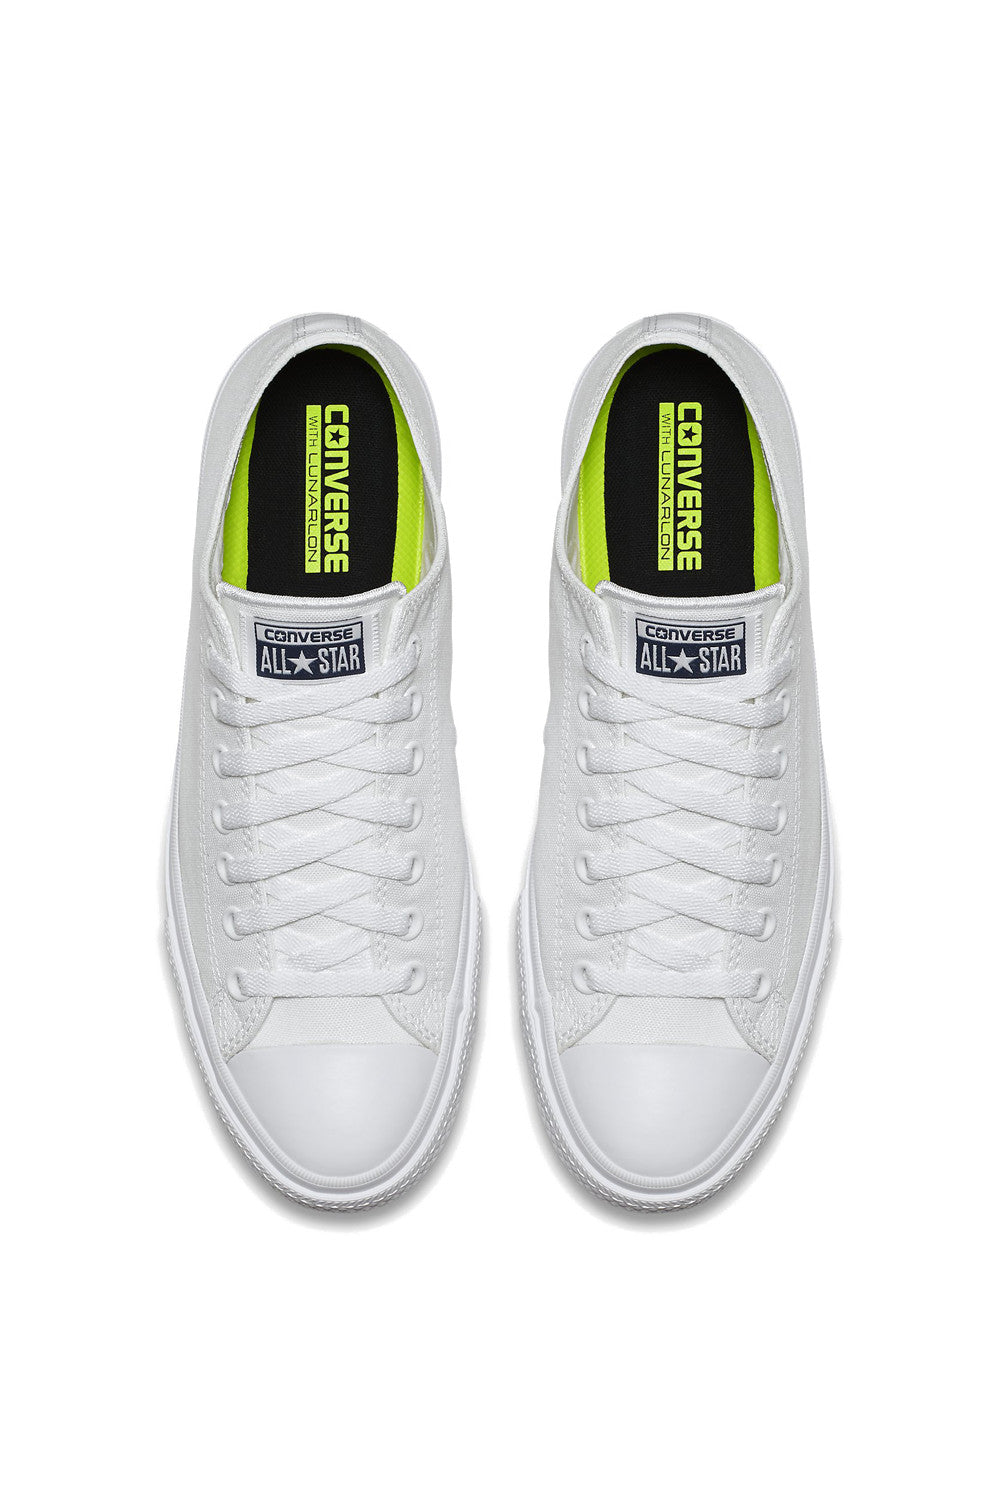 Sky tillykke Sociale Studier Converse Chuck Taylor ll Ox Low Top Shoes– Mainland Skate & Surf